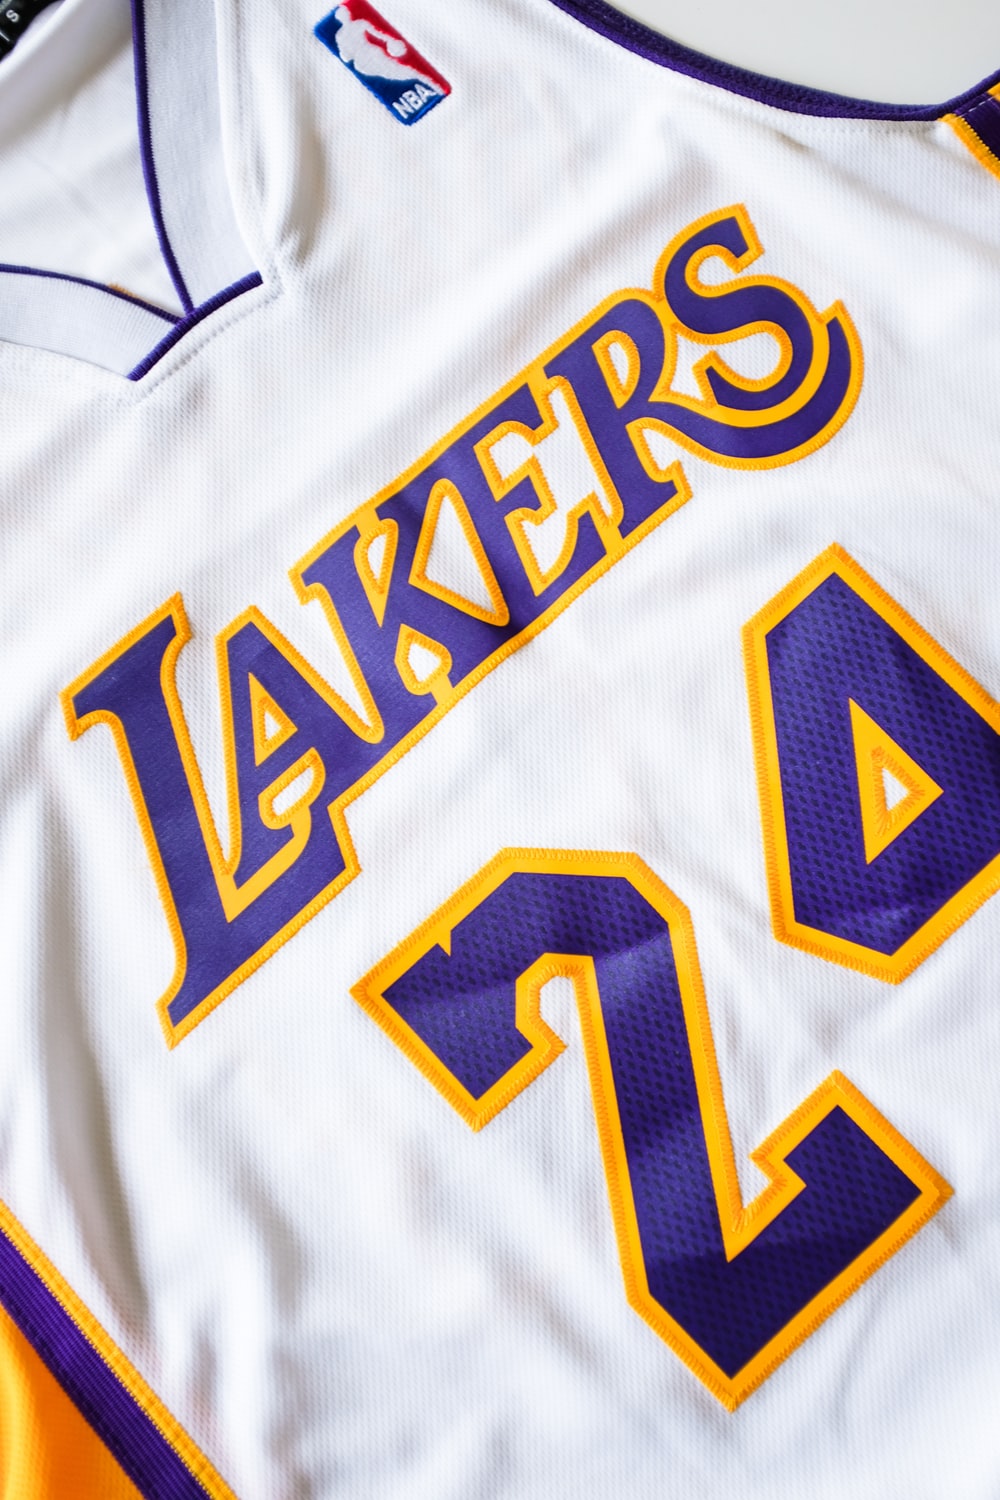 Lakers Jersey Picture. Download Free Image